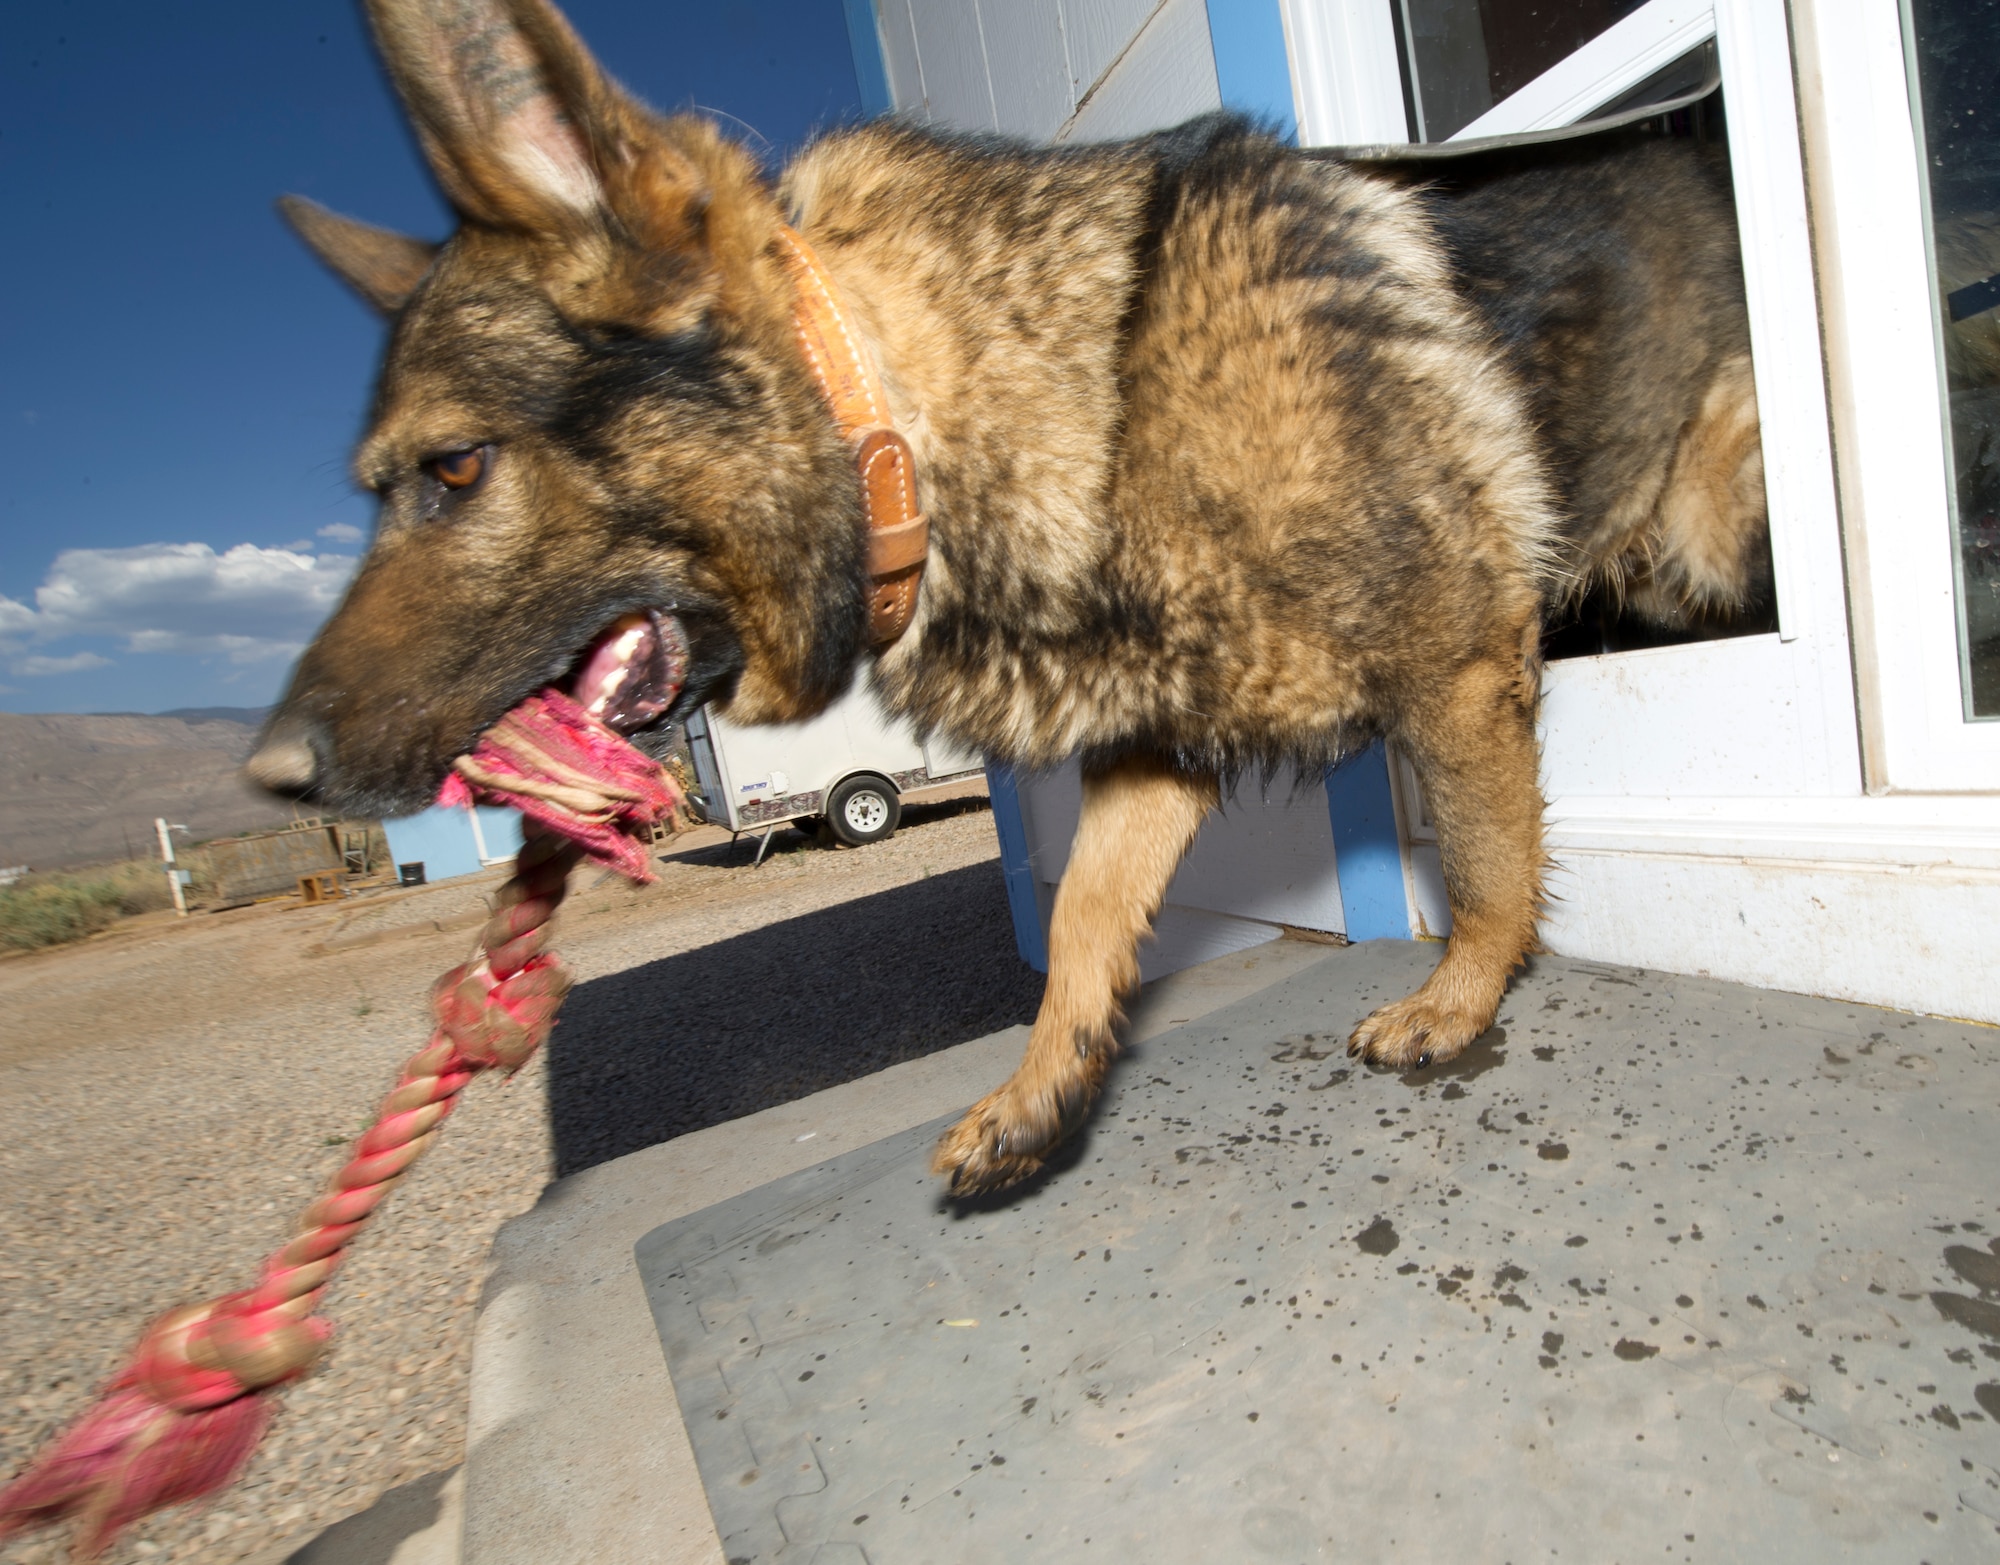 ALAMOGORDO, N.M. – Bill, a retired military working dog, runs out the doggy door of his new home May 5, 2011. The prior military canine was recently adopted by Lt. Col. Jeff Krienke, 49th Wing Safety chief, and his wife, Debbie. In his military career, Bill has been on two deployments as an explosive detector dog and his records show at least four real-world finds. Today, he is living out his “retirement” as a normal dog and pet. (U.S. Air Force photo by Senior Airman Sondra Escutia/Released) 